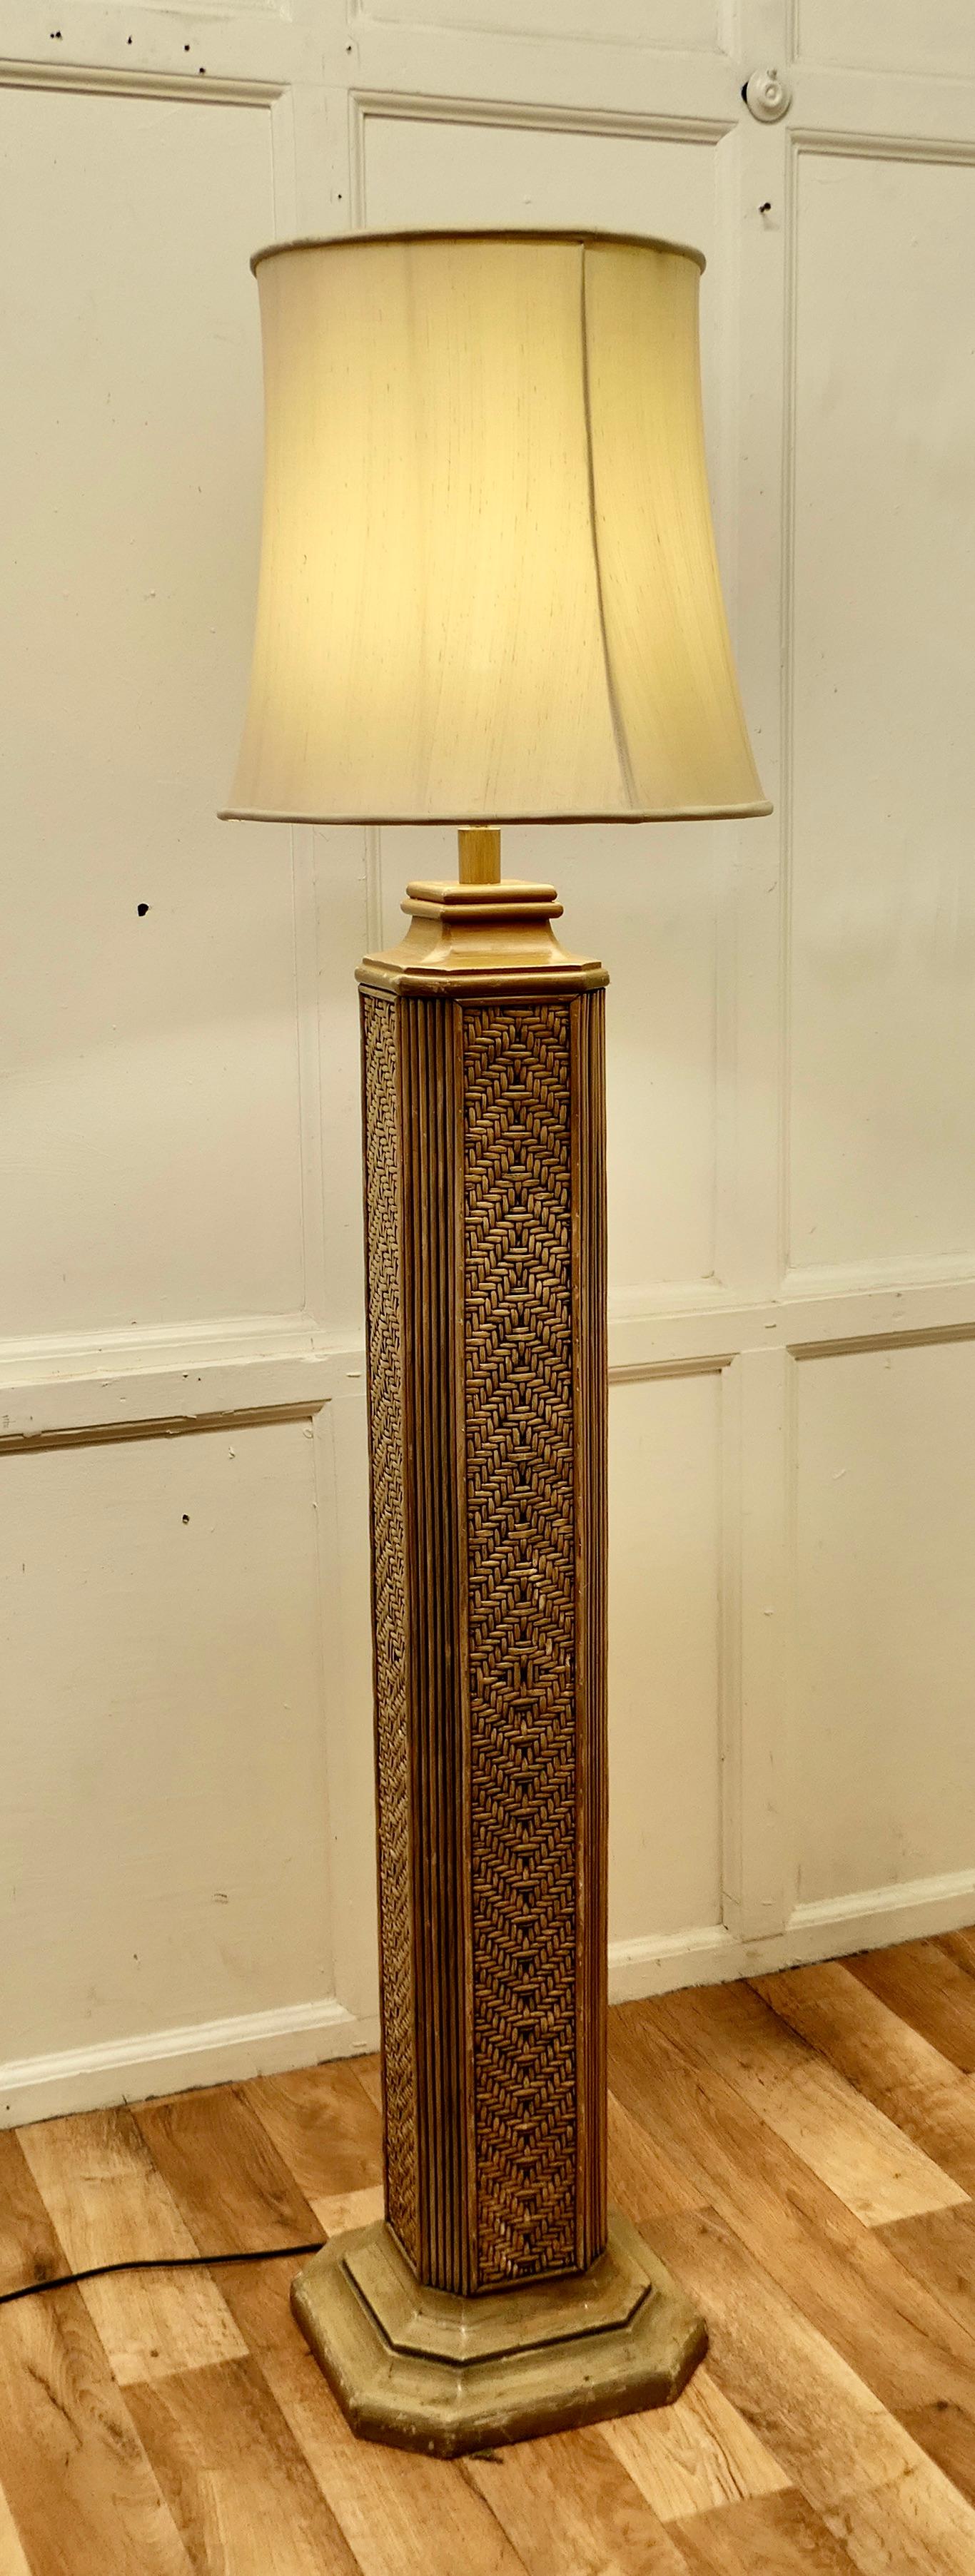 Tall Art Deco bamboo cane column floor lamp.

This is a very stylish Art Deco column floor lamp.
The lamp has a square shaped column in a pattern woven bamboo and it is set on an Odeon style base matching the top mouldings. 
The lamp is in good